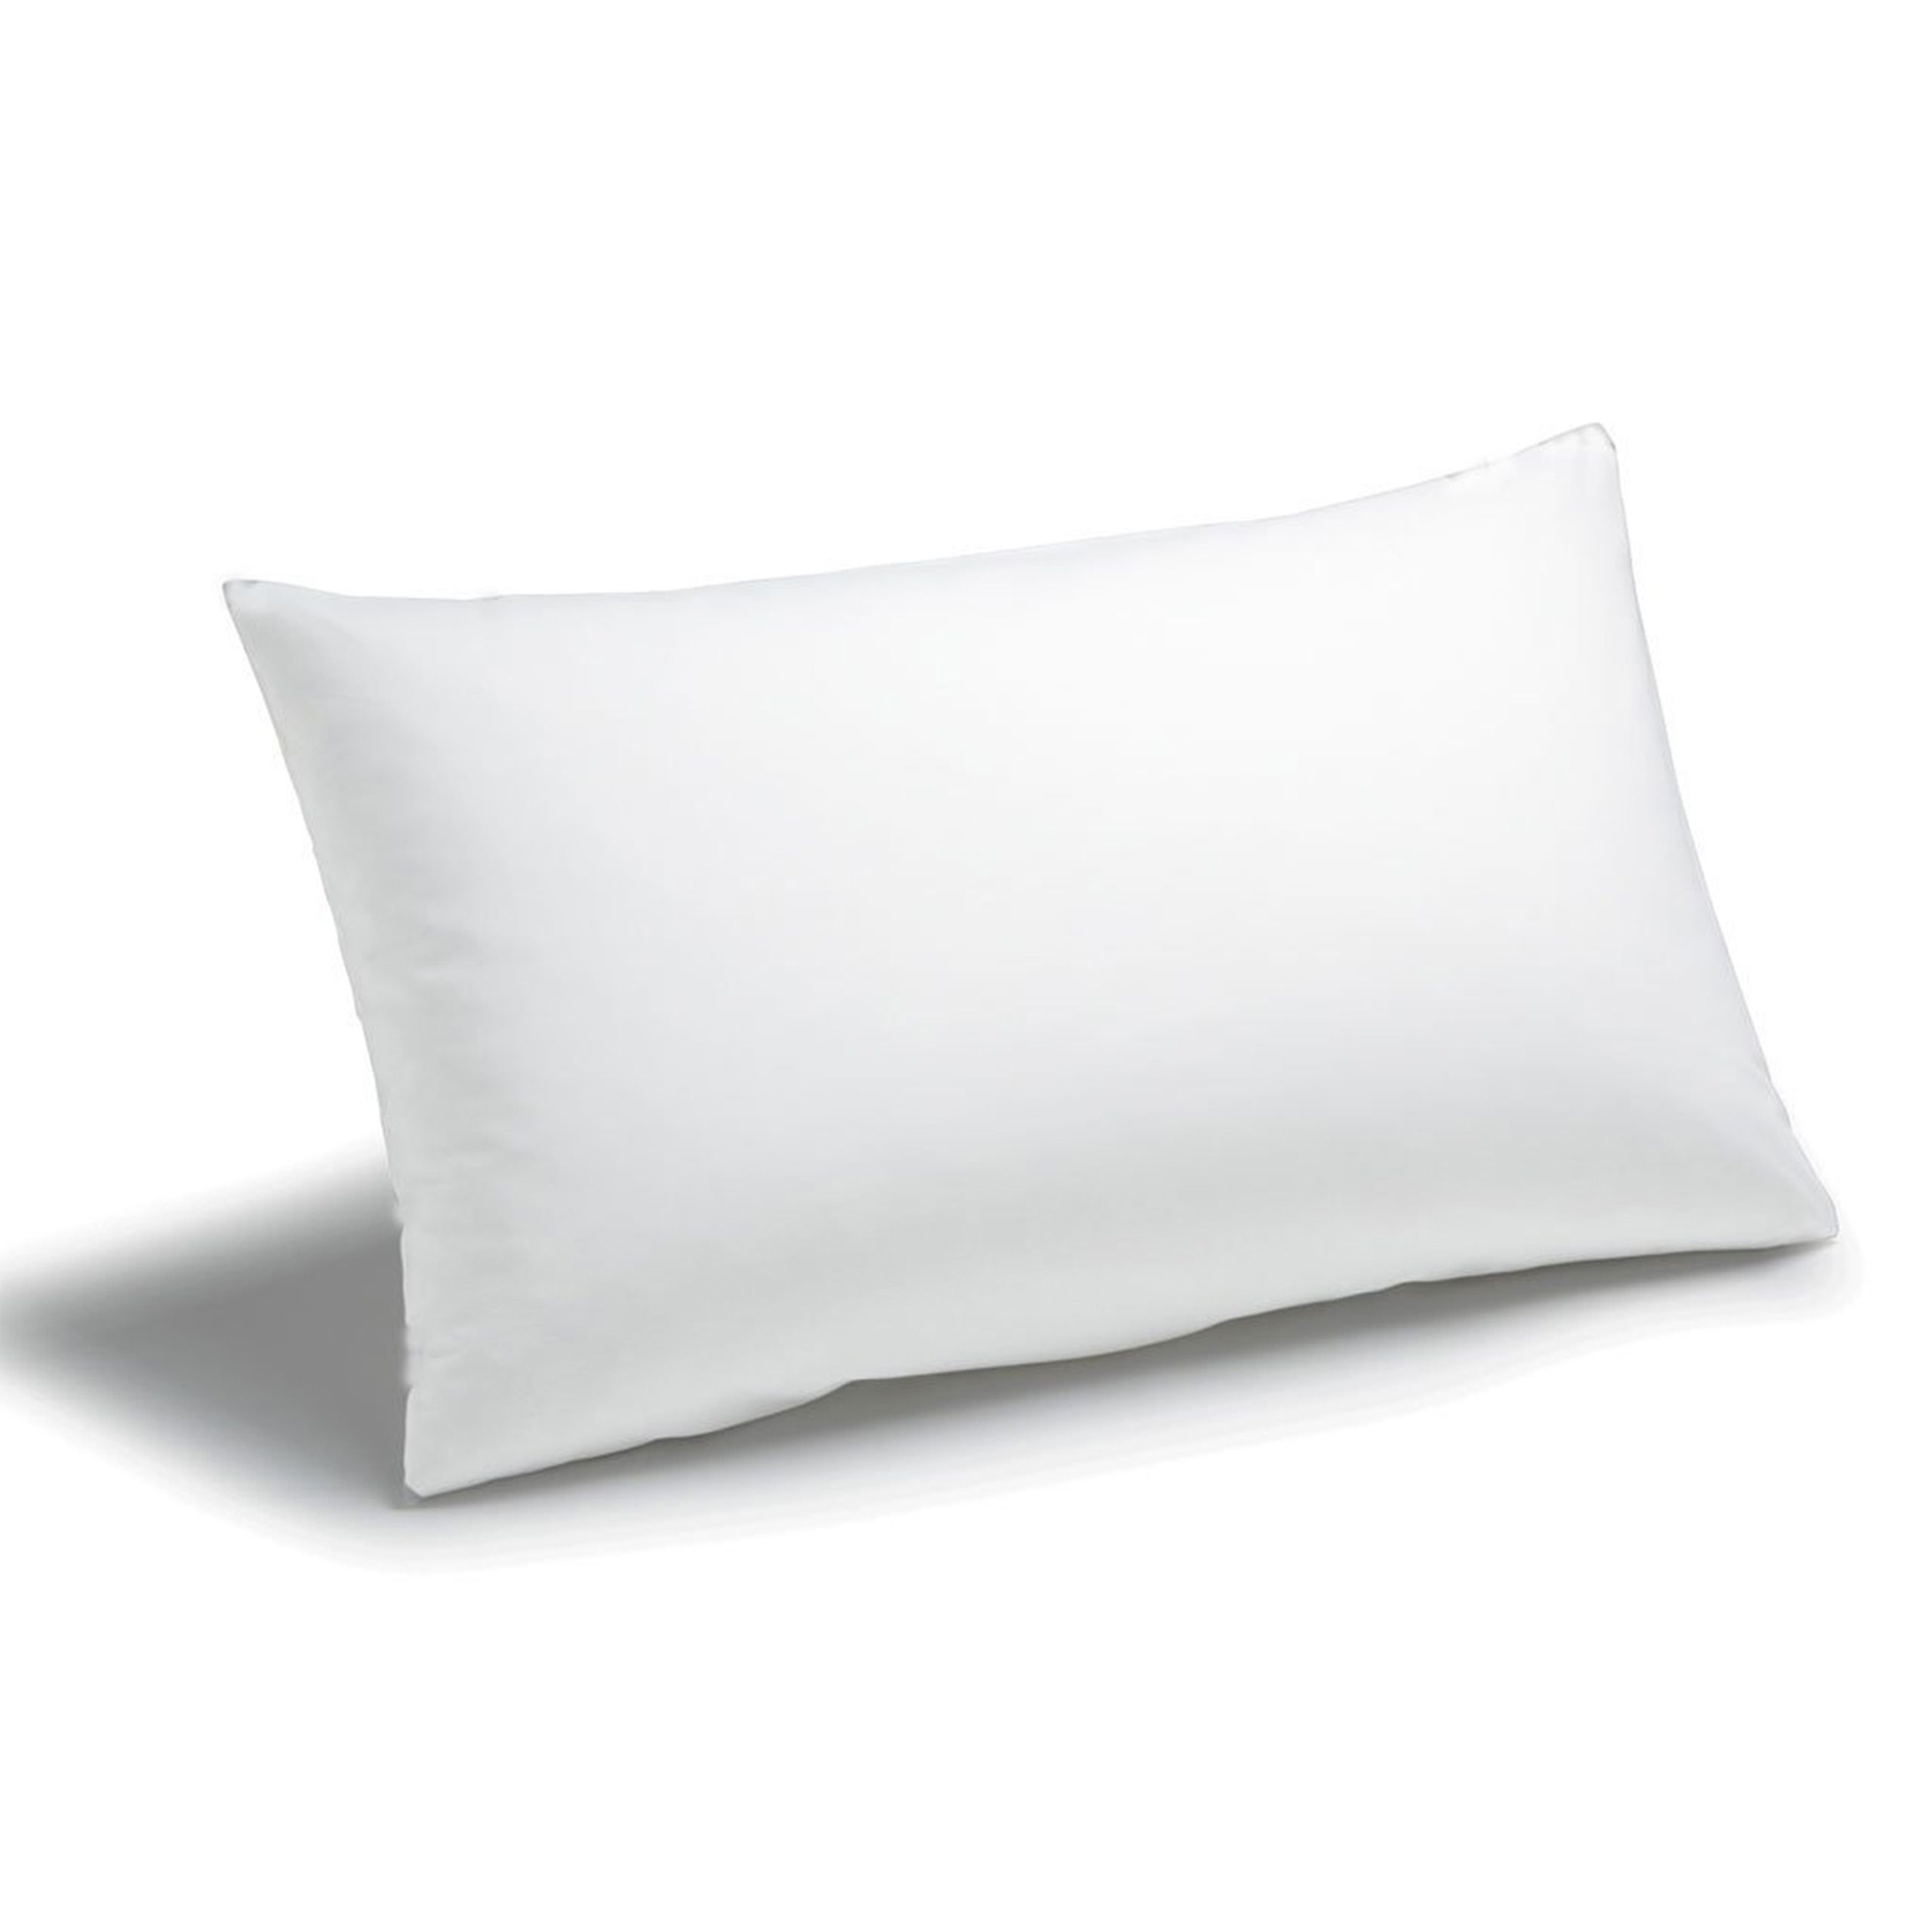 The high quality and luxury Super bounce pillows envelop you with a feeling of warmth, snugness and comfort from the moment your head hits the pillow. Non-Allergenic & Fully Machine Washable, the Super bounce keeps it's shape when others would normally let you down and come packed with soft touch Super bounce Hollow fibres.